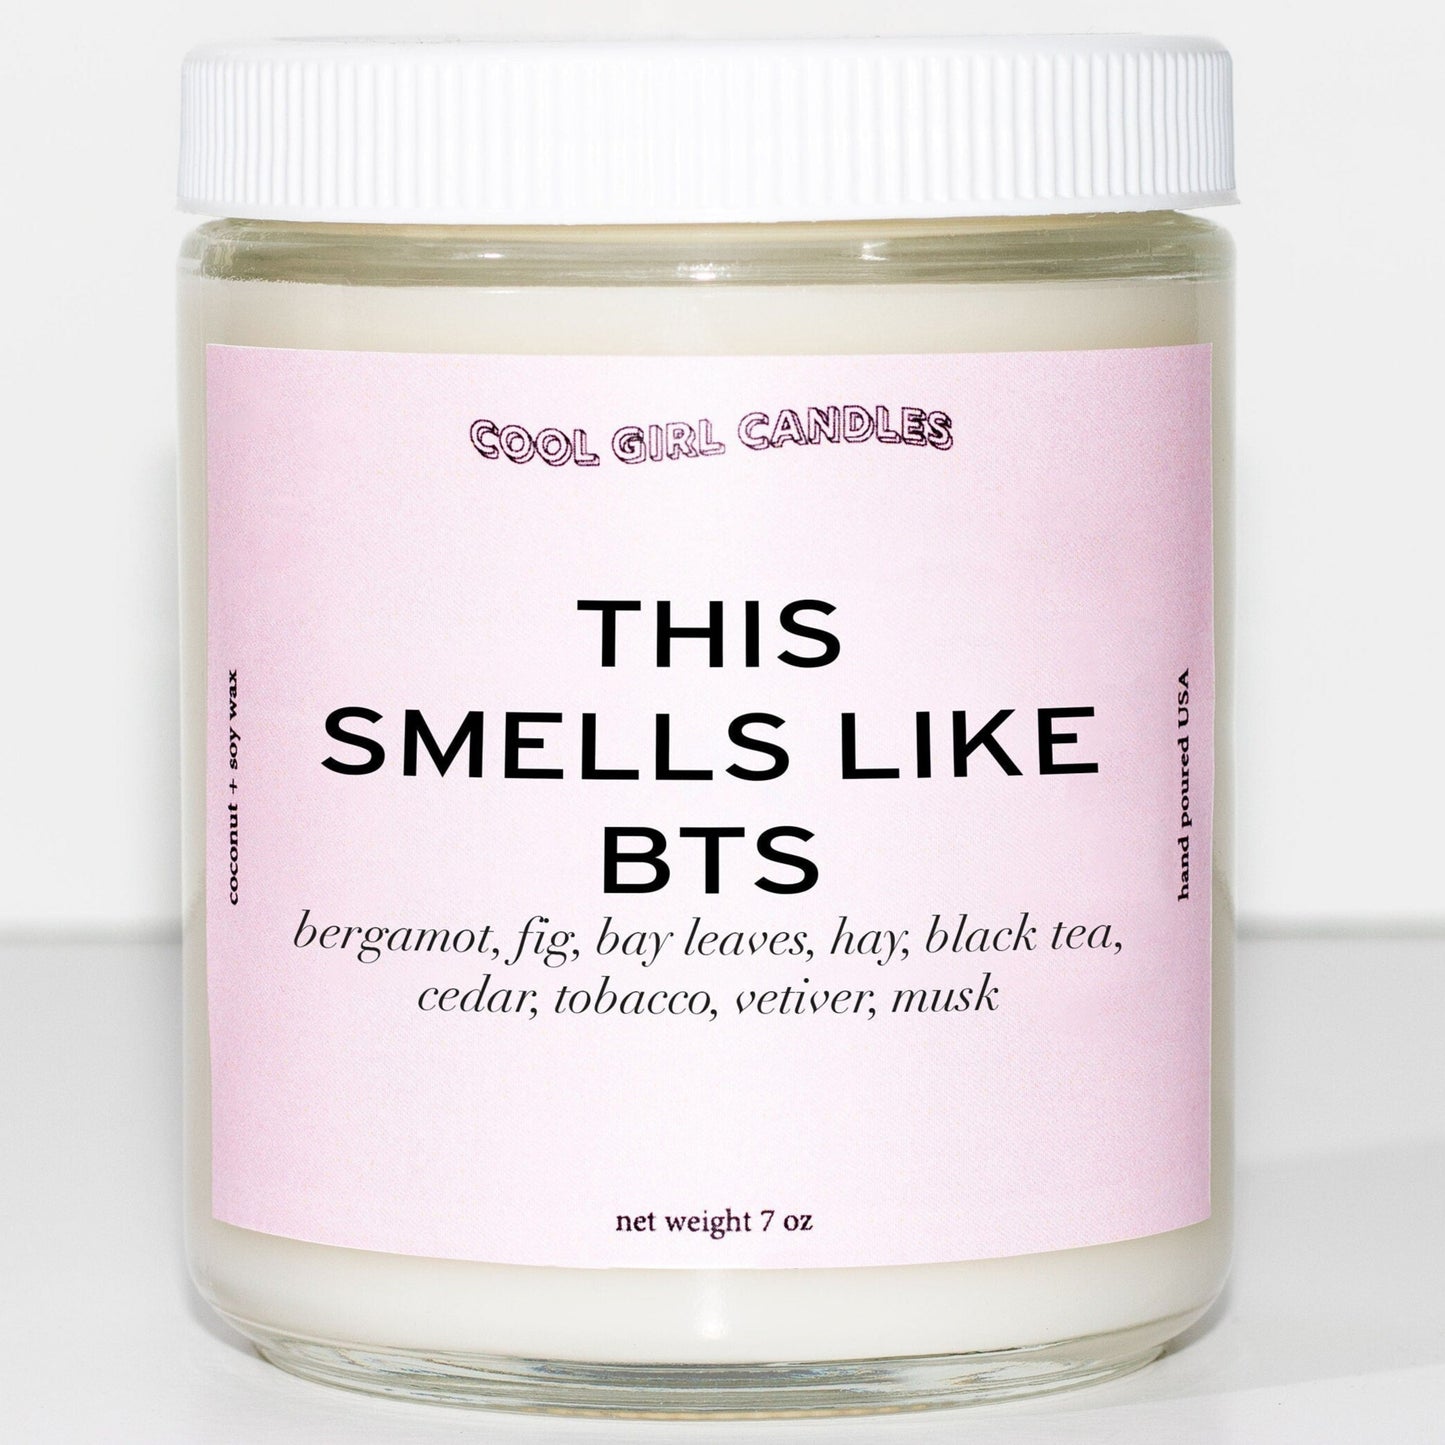 this smells like bts candle cool girl candles jimmin candle jungkook candle jimin candle bts merch